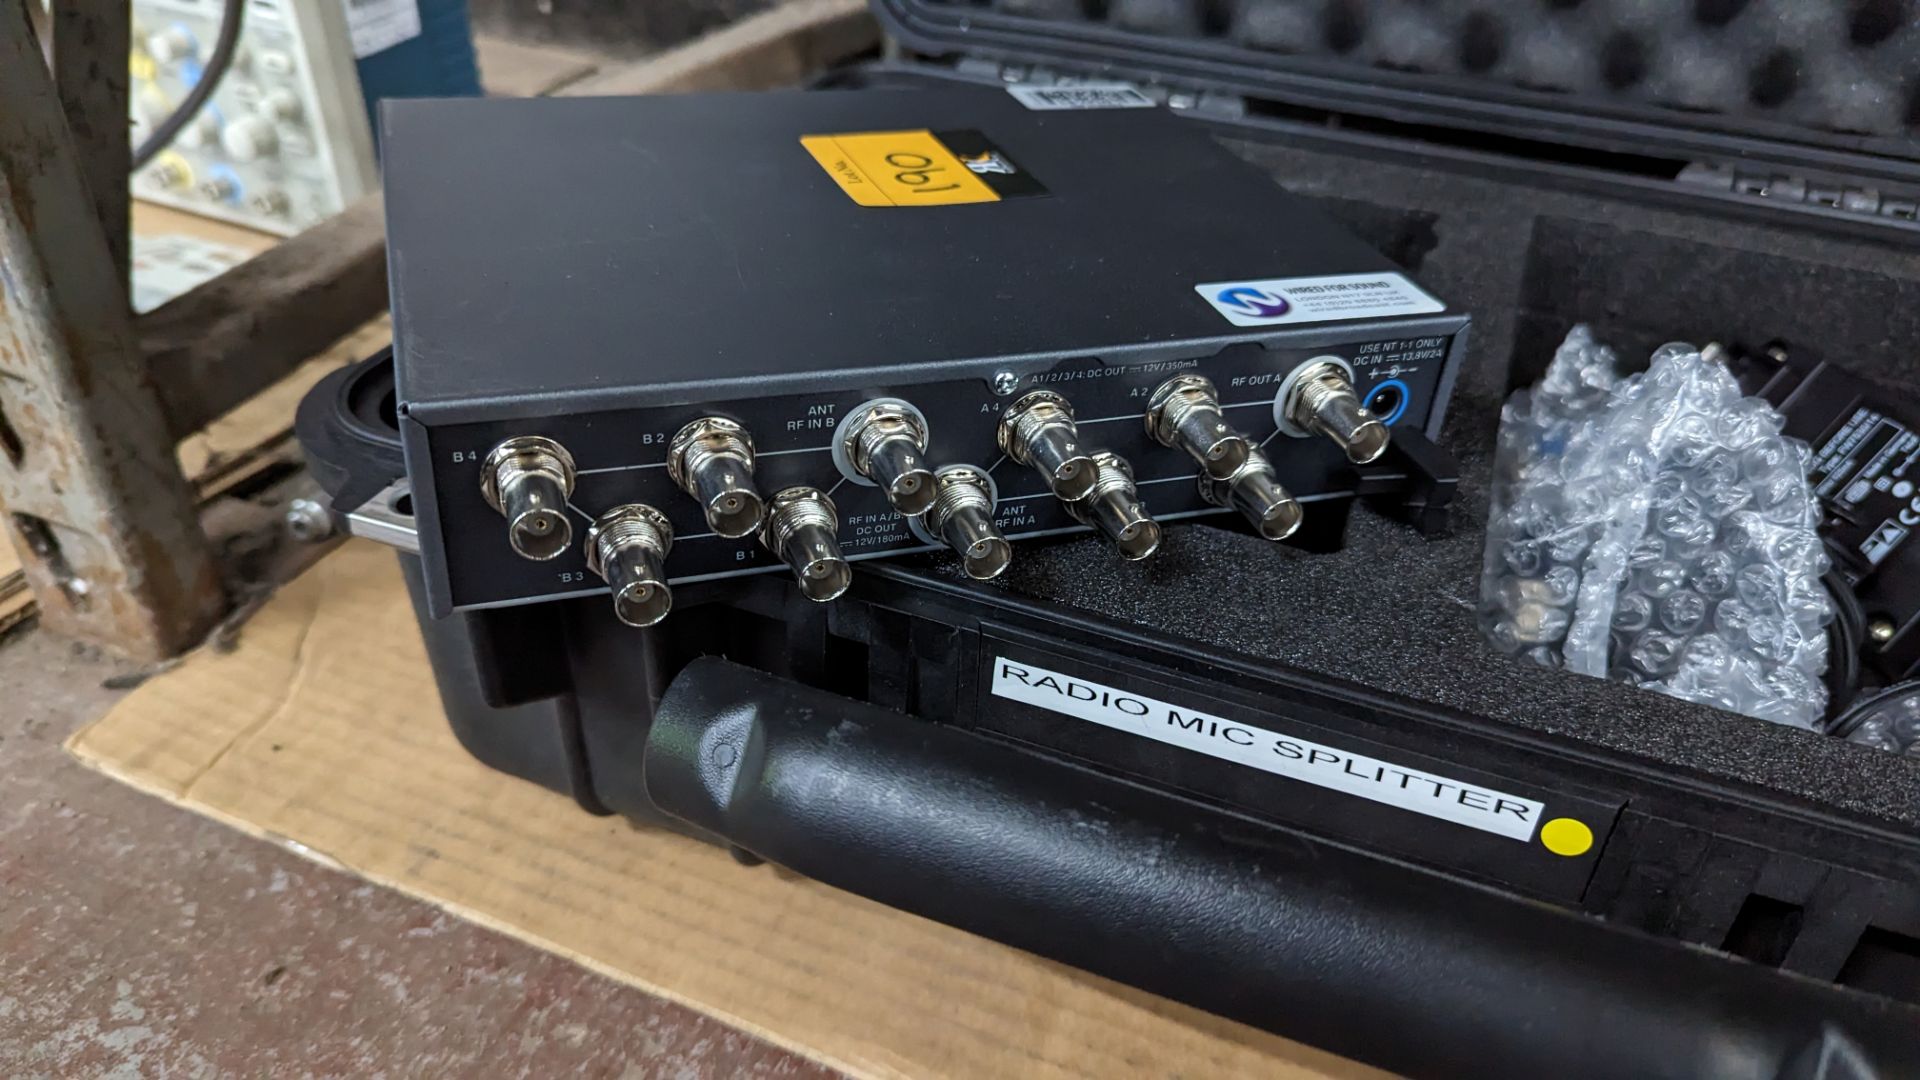 Sennheiser antenna splitter, model ASA1, including power pack, cables and pelican case - Image 4 of 10